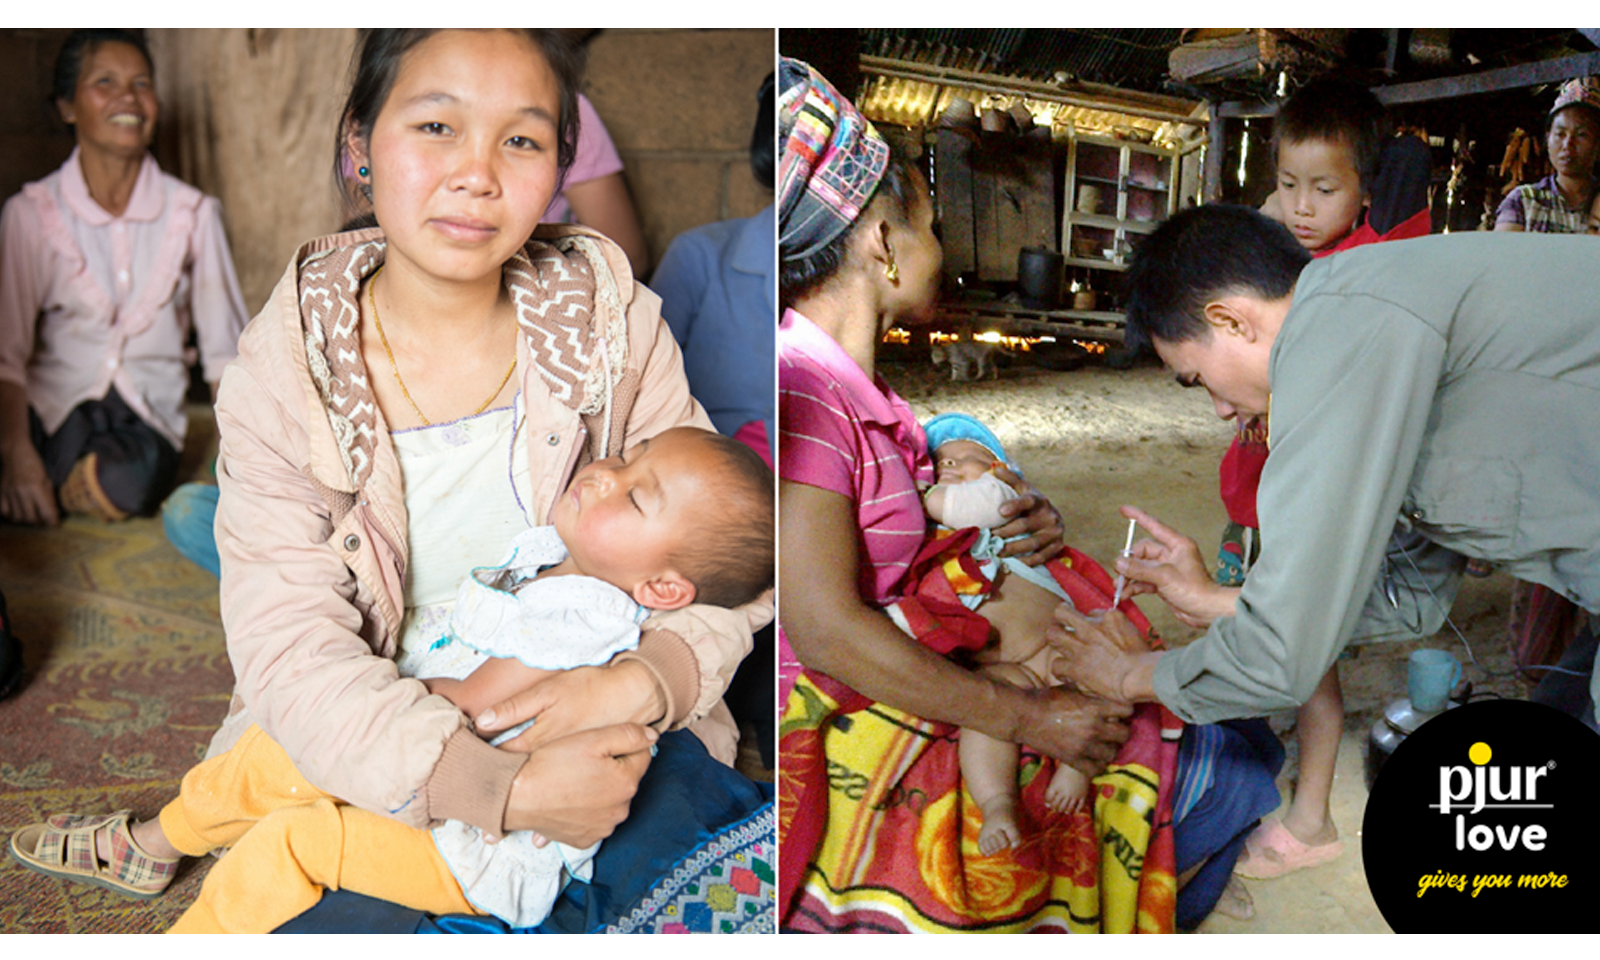 pjur Collects Donations for Maternal Health Project in Laos